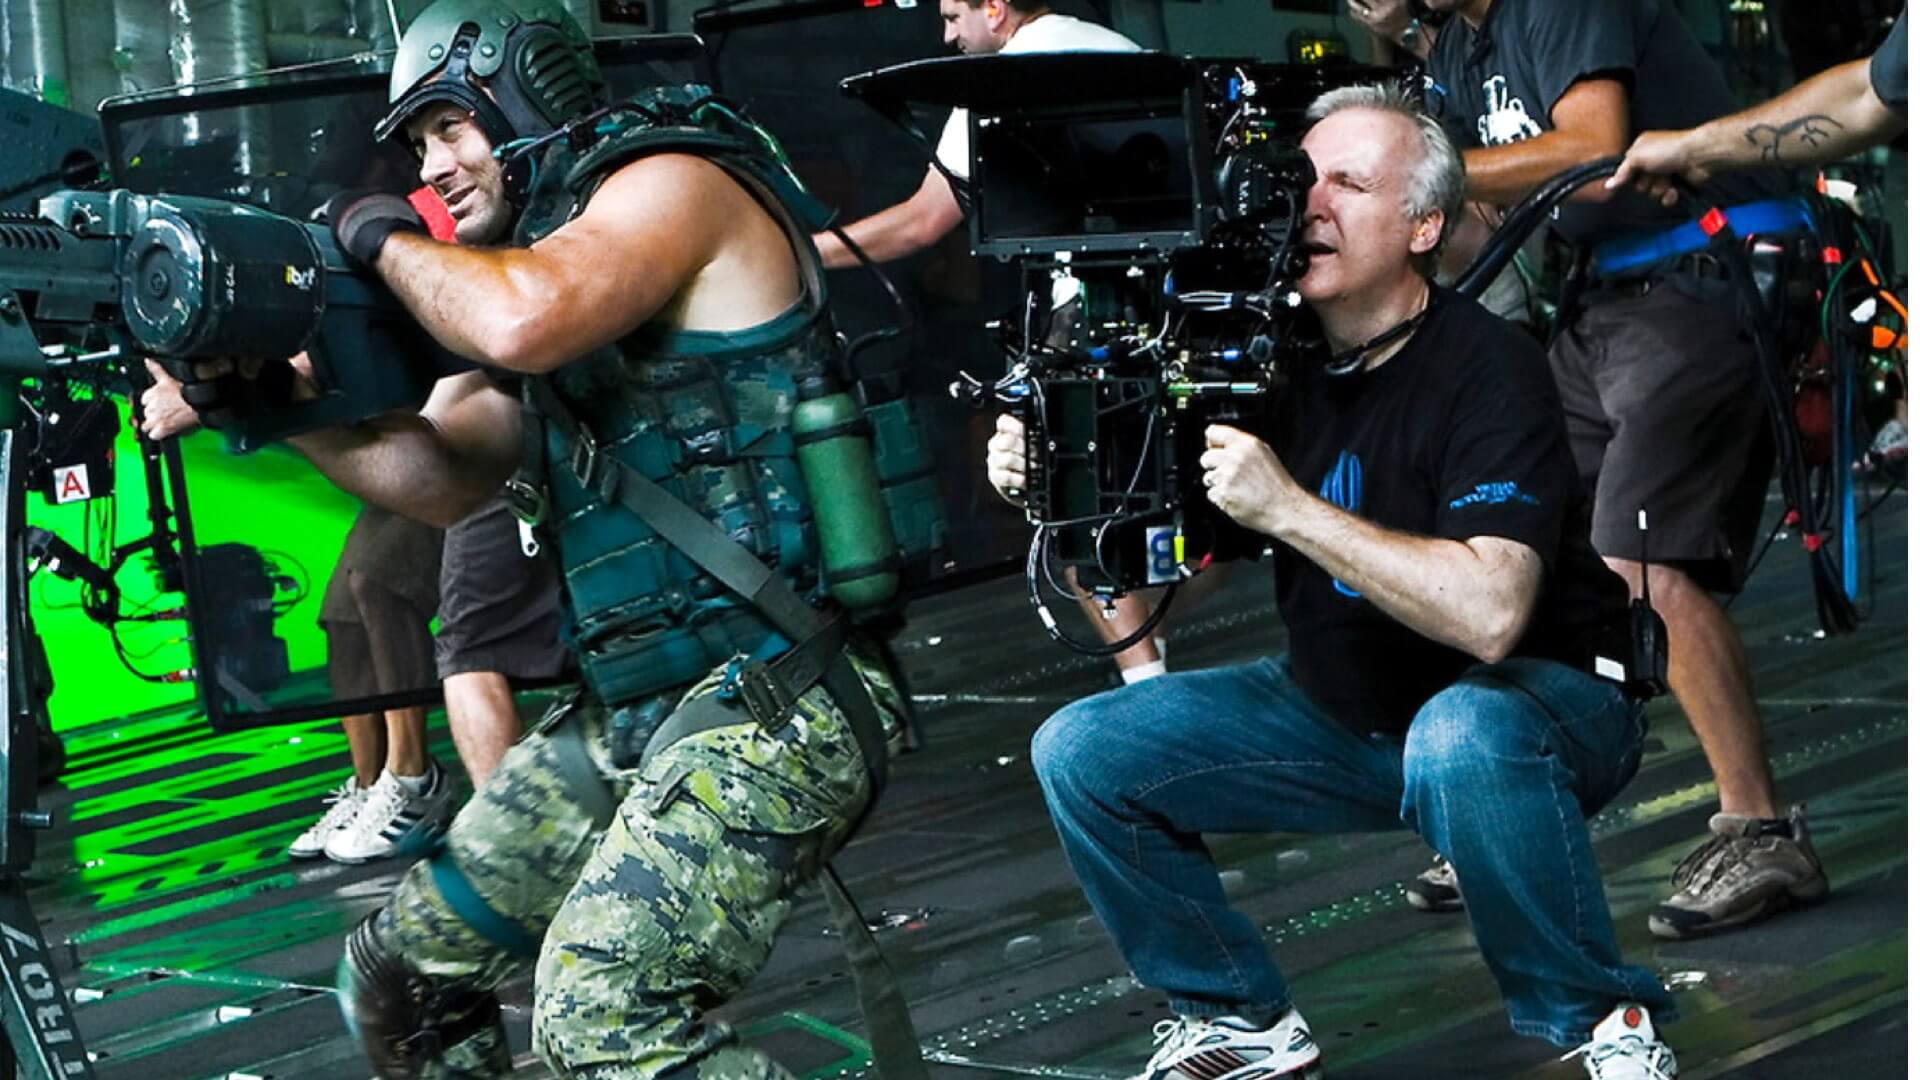 James Cameron Avatar The Way Of Water VFX Behind The Scenes Watch Video   Avatar 2 VFX Making Video of Avatar2